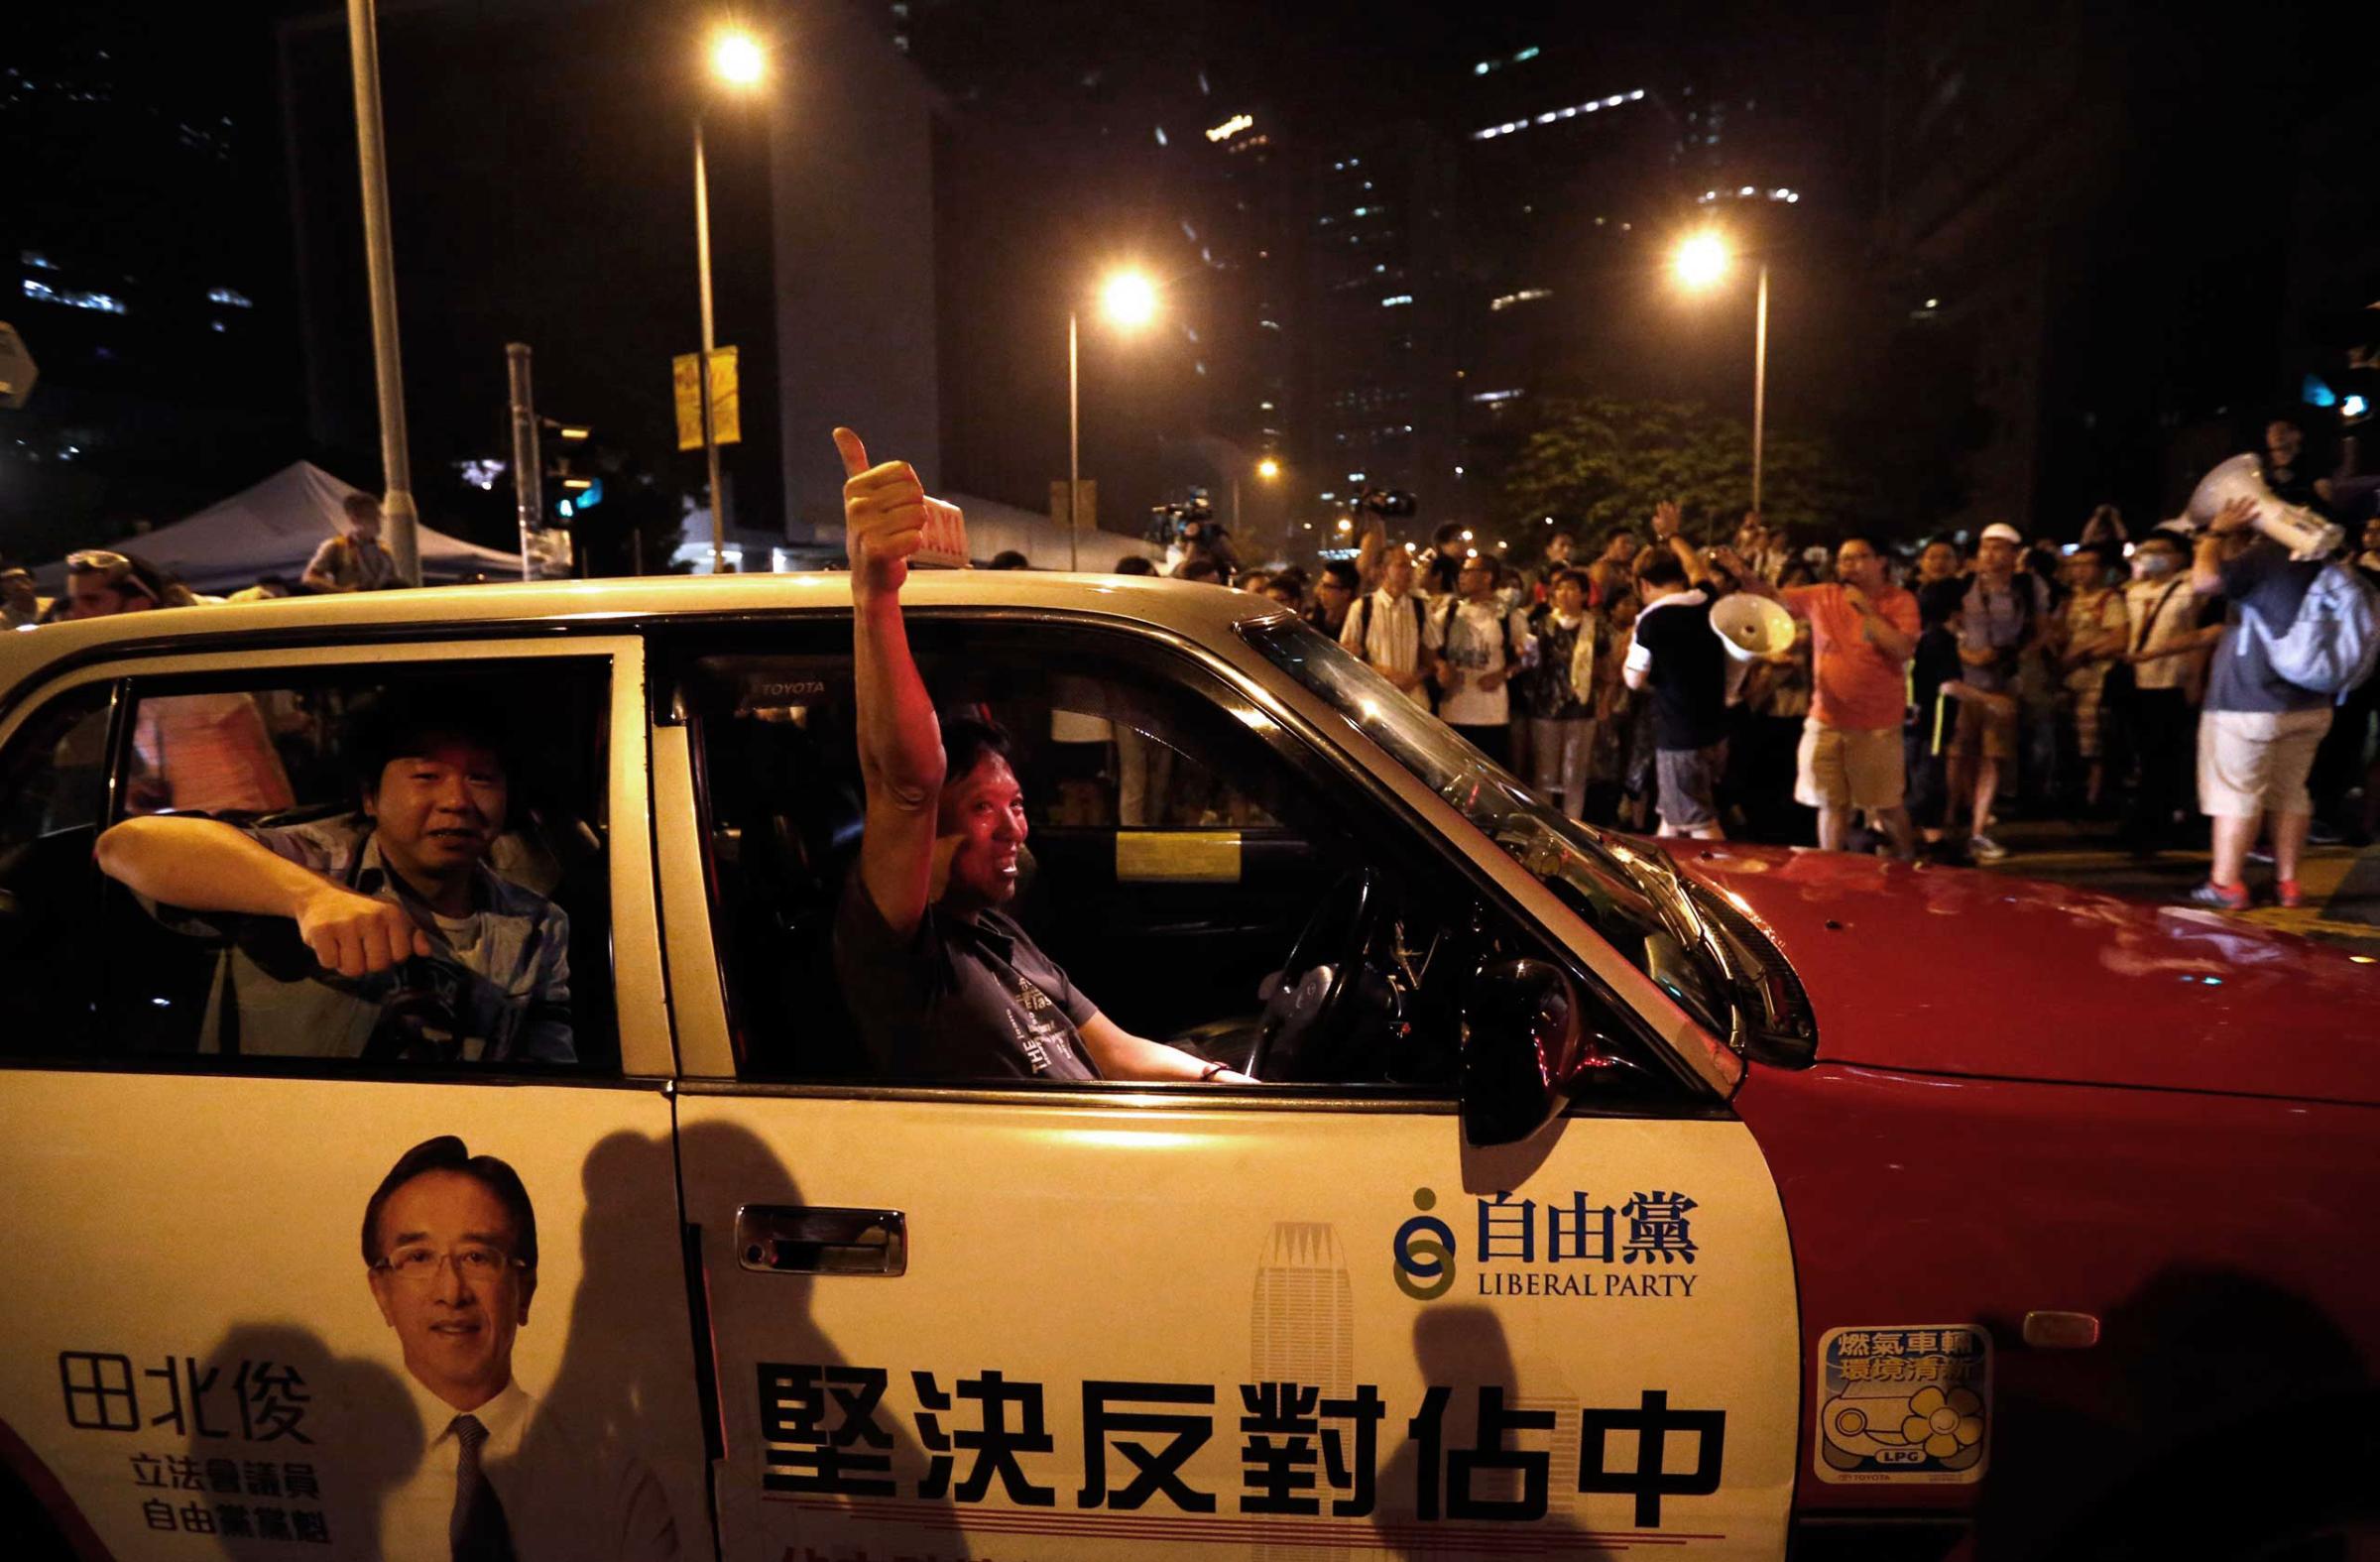 A taxi driver gives a thumbs up to pro-democracy protesters as he drives past the protest site in front of Hong Kong's Chief Executive Leung Chun-ying's office, Oct. 3, 2014 in Hong Kong.